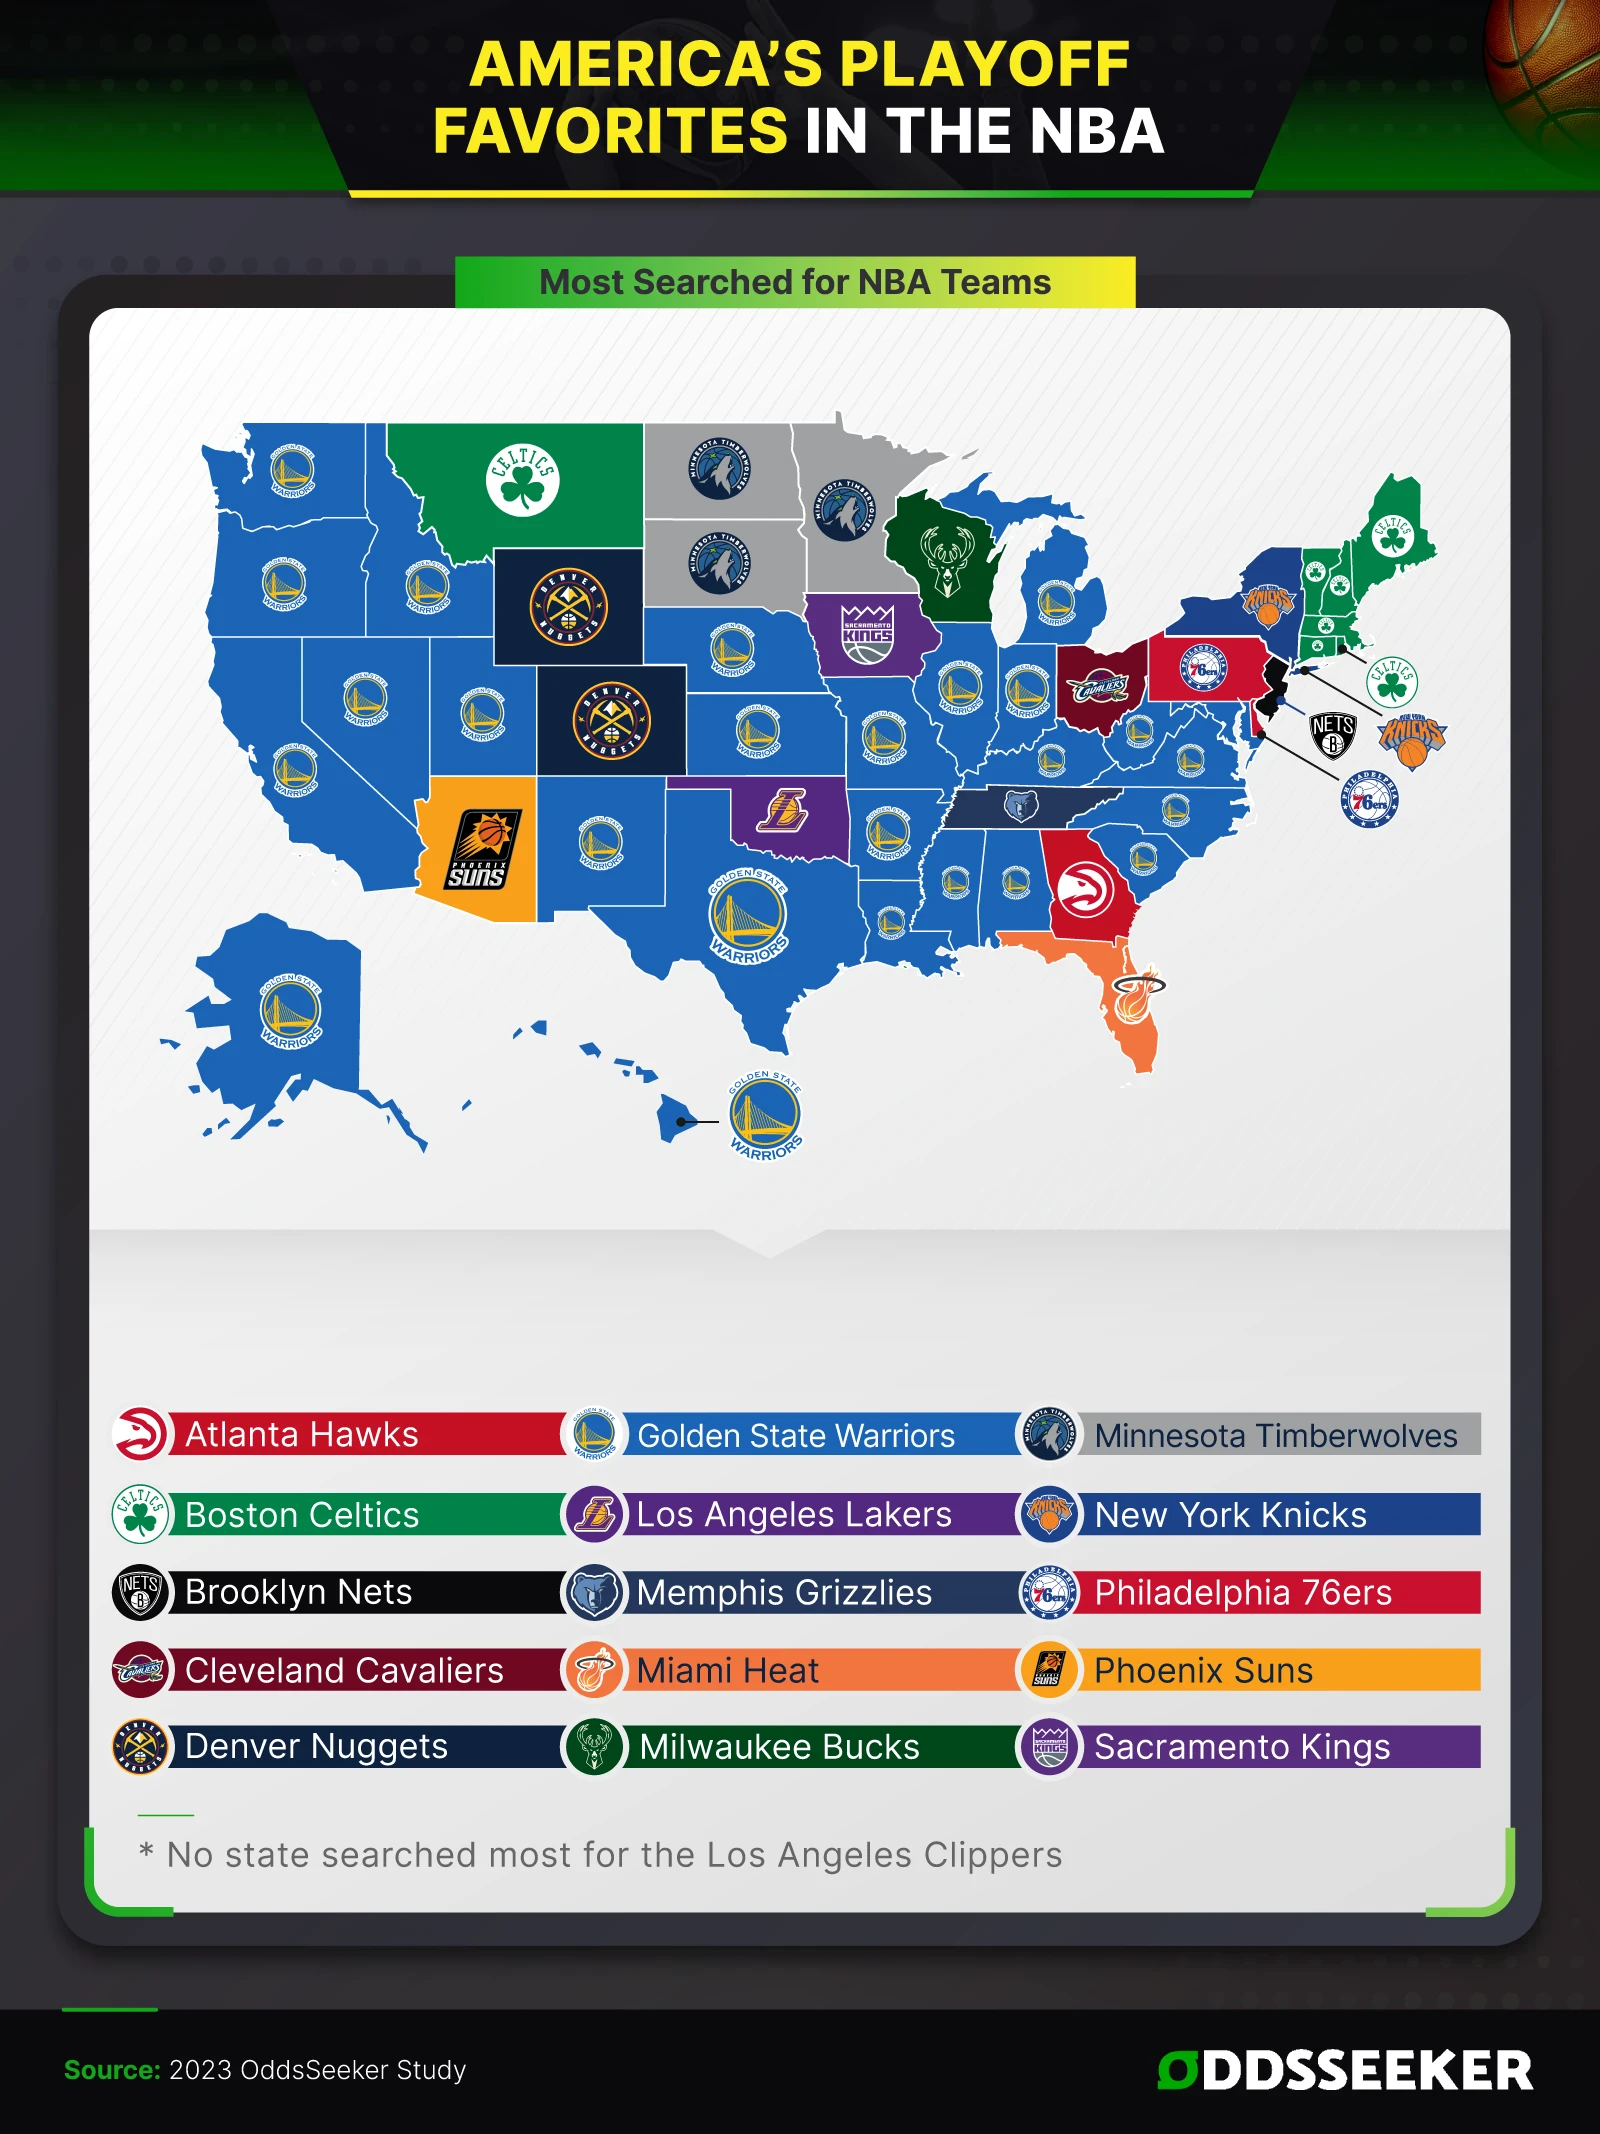 Infographic based on Google Search data showing the Most searched for teams in the NBA